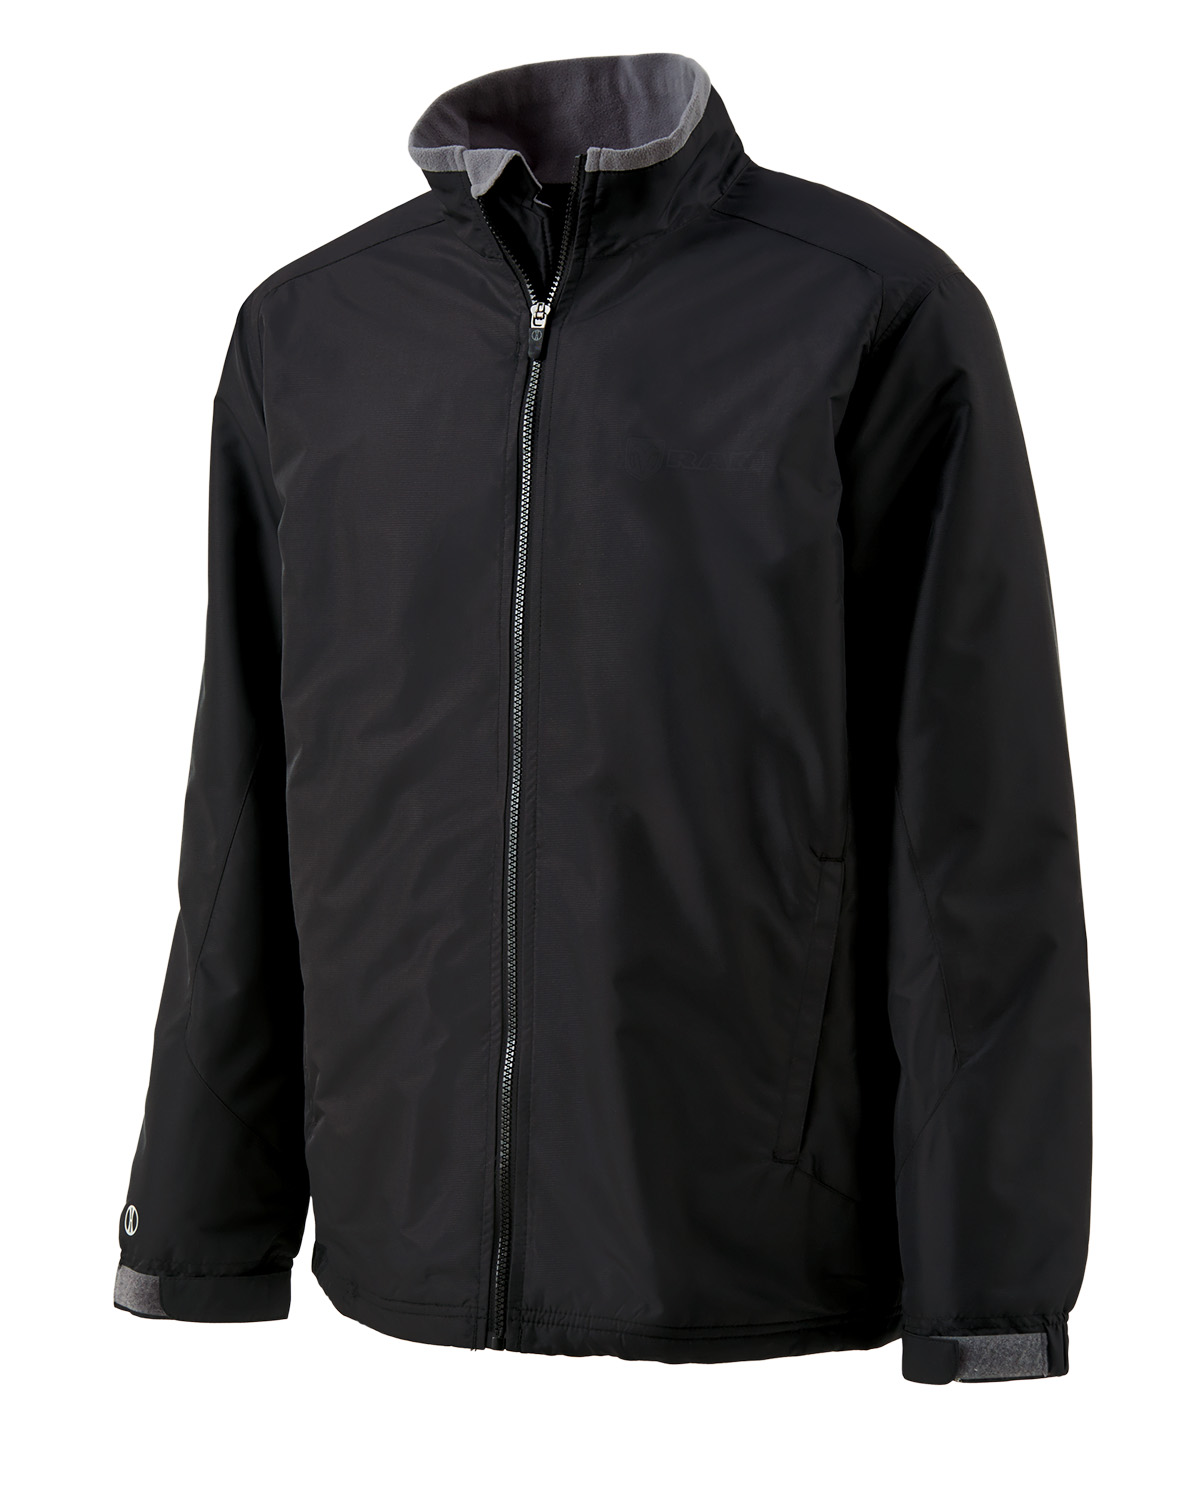 Holloway 229002 - Adult Polyester Full Zip Scout 2.0 Jacket